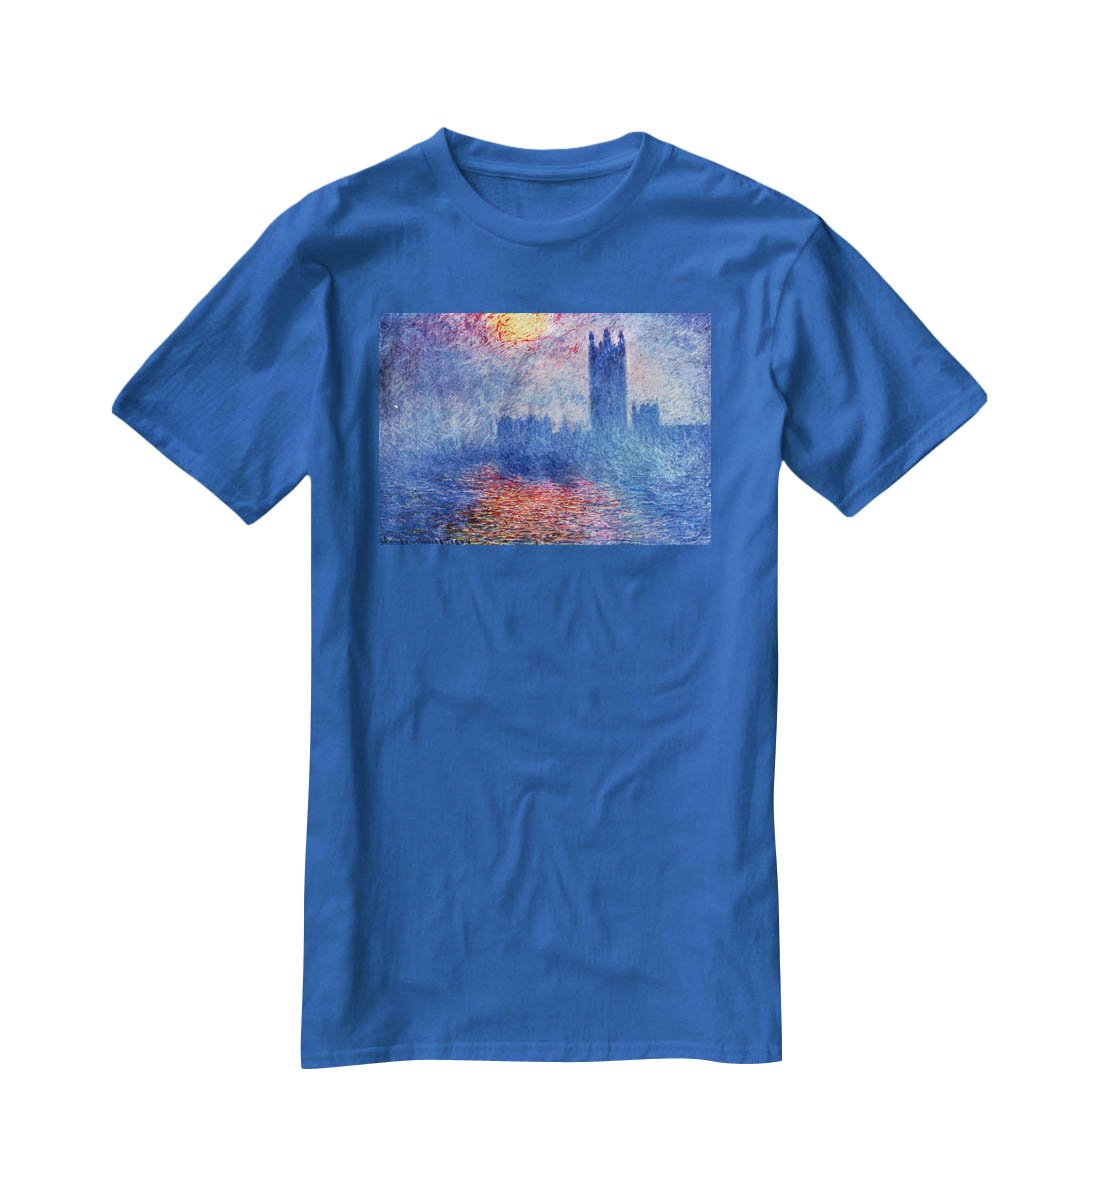 The Parlaiment in London by Monet T-Shirt - Canvas Art Rocks - 2